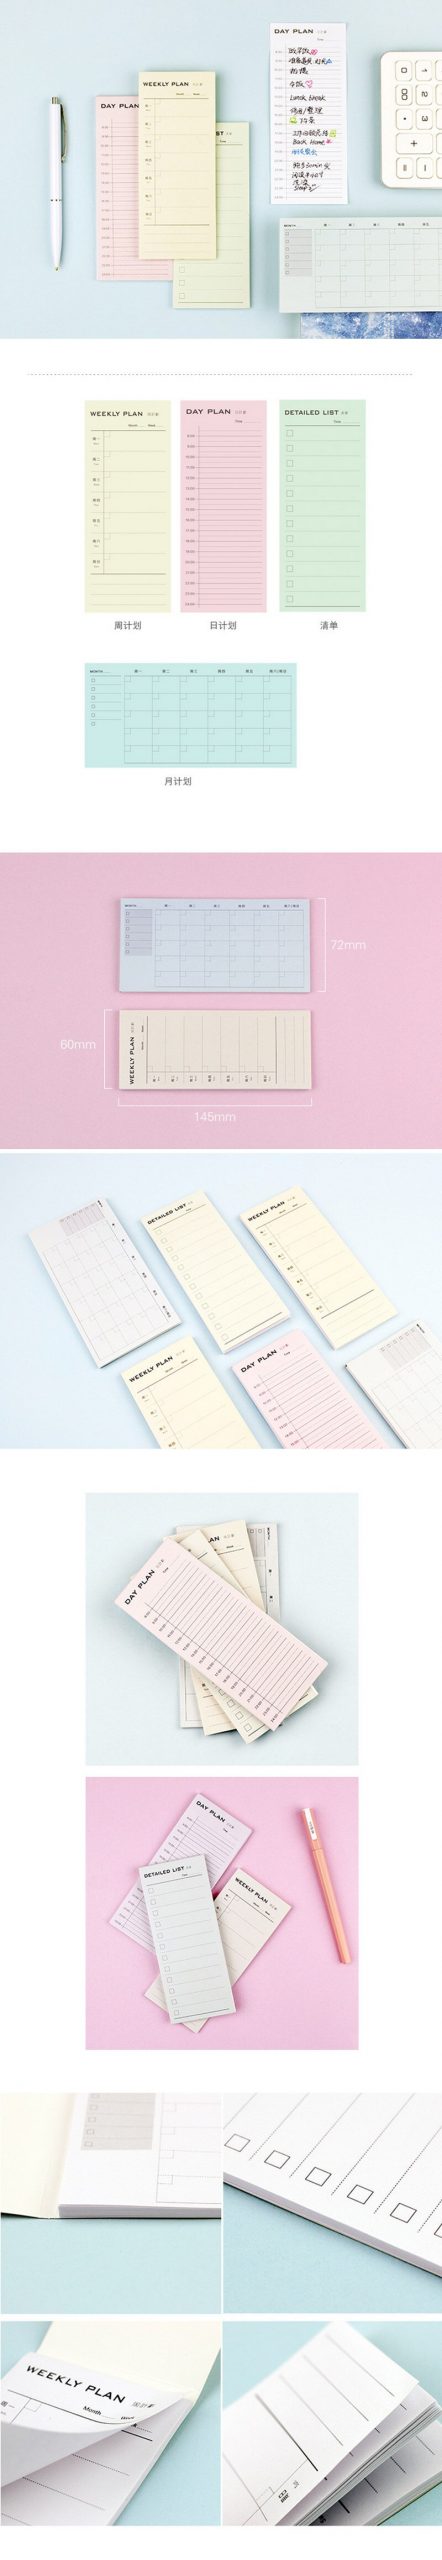 Weekly plan Inventory student notebook diary book material escolar memo notepad kawaii stationery school supplies